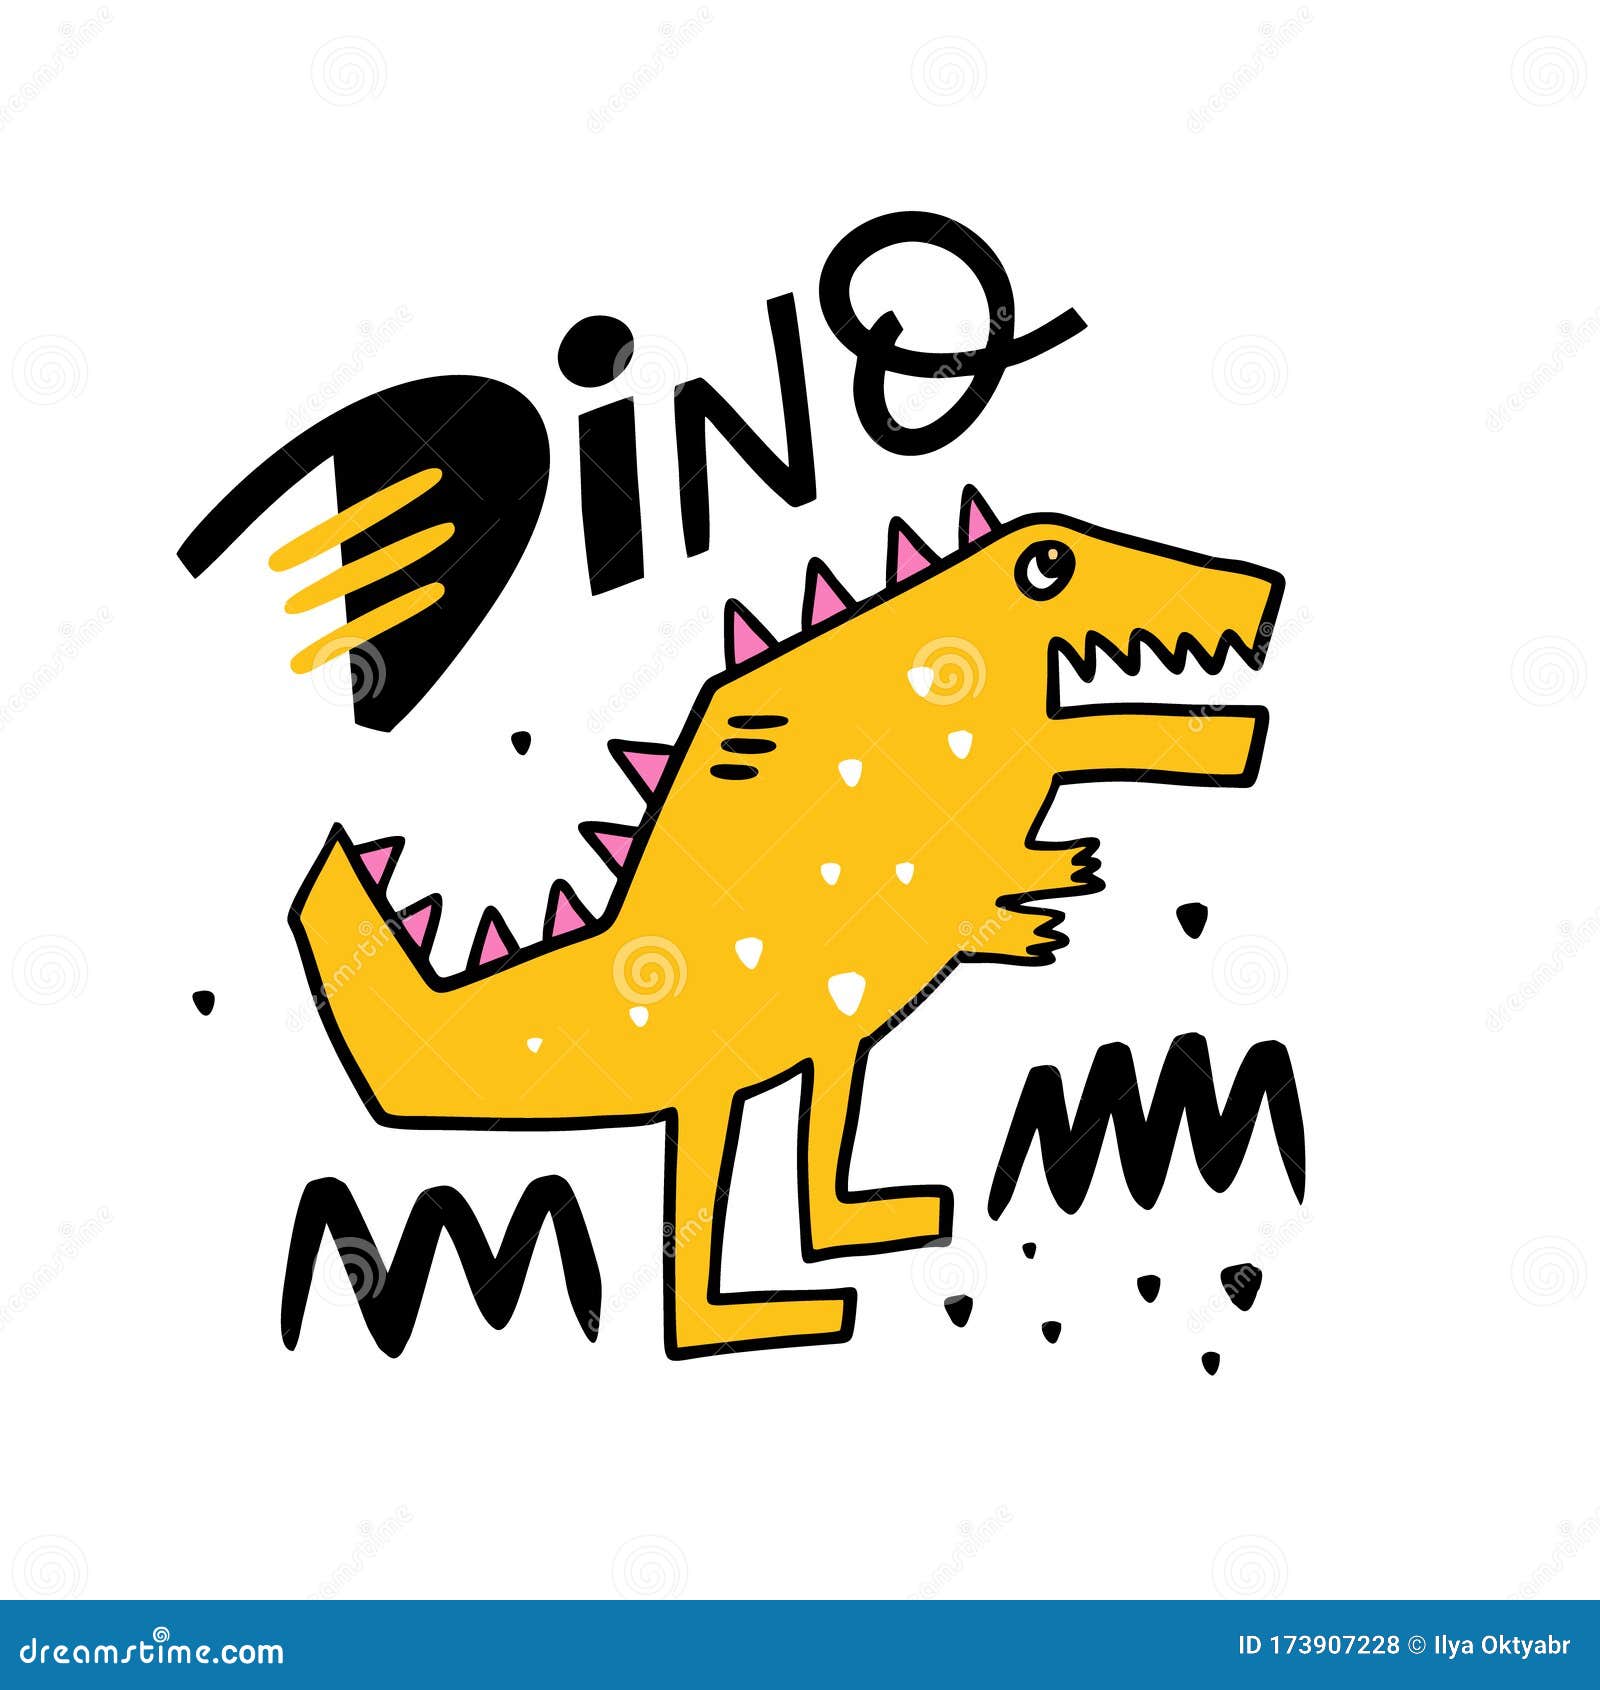 Cute Yellow Dinosaur Cartoon Stock Illustrations 1 027 Cute Yellow Dinosaur Cartoon Stock Illustrations Vectors Clipart Dreamstime Orange dinosaur on yellow background. https www dreamstime com cute yellow dinosaur hand drawn colorful vector illustration cartoon style line art yum sign isolated white background image173907228